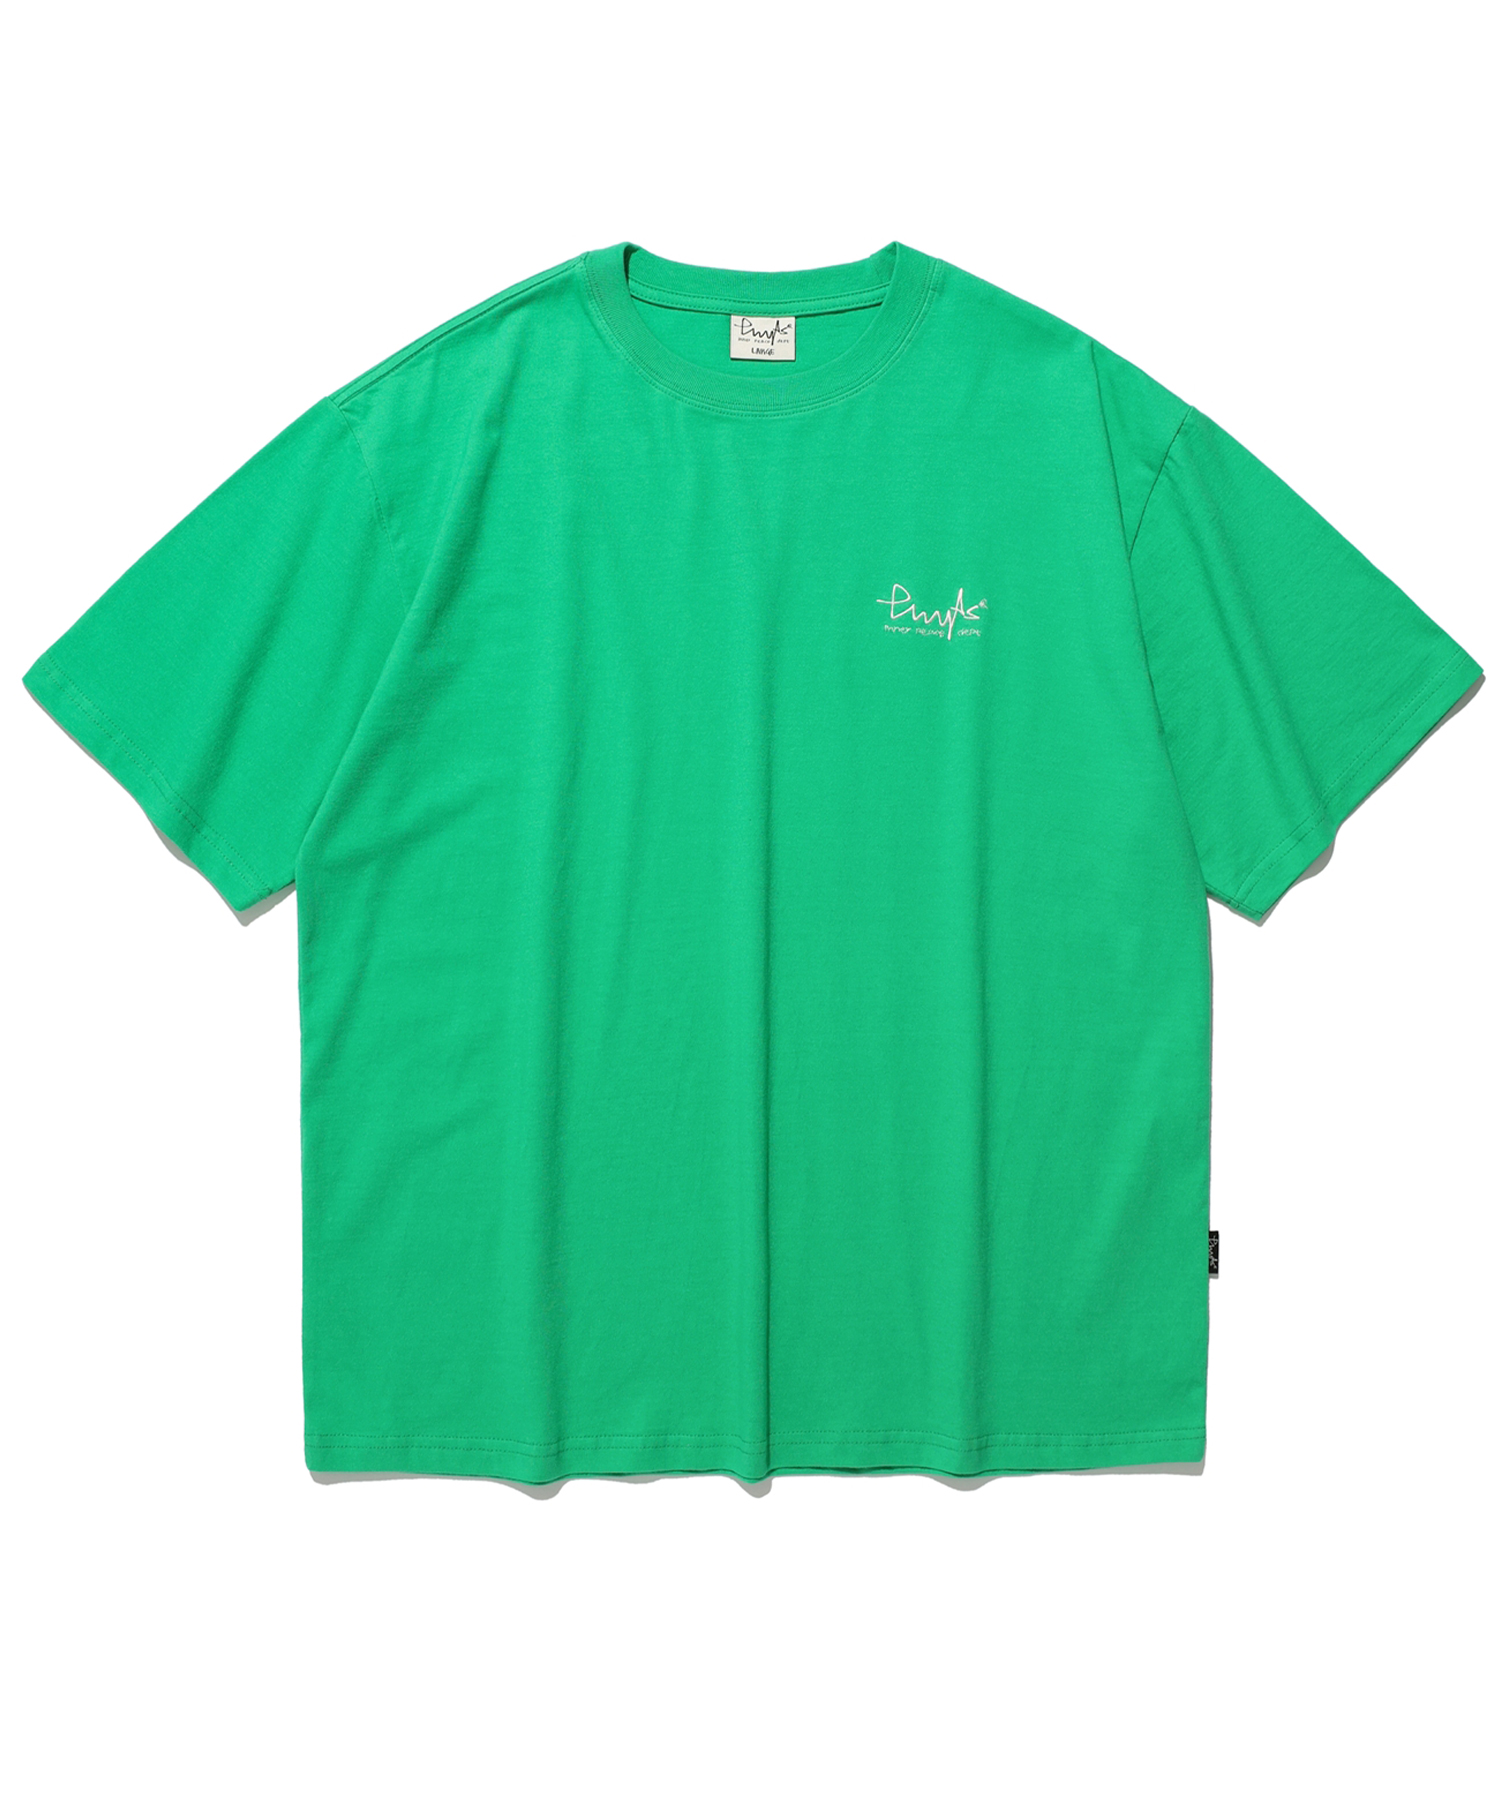 PHYPS® SMALL SIGN LOGO SS VINTAGE GREEN